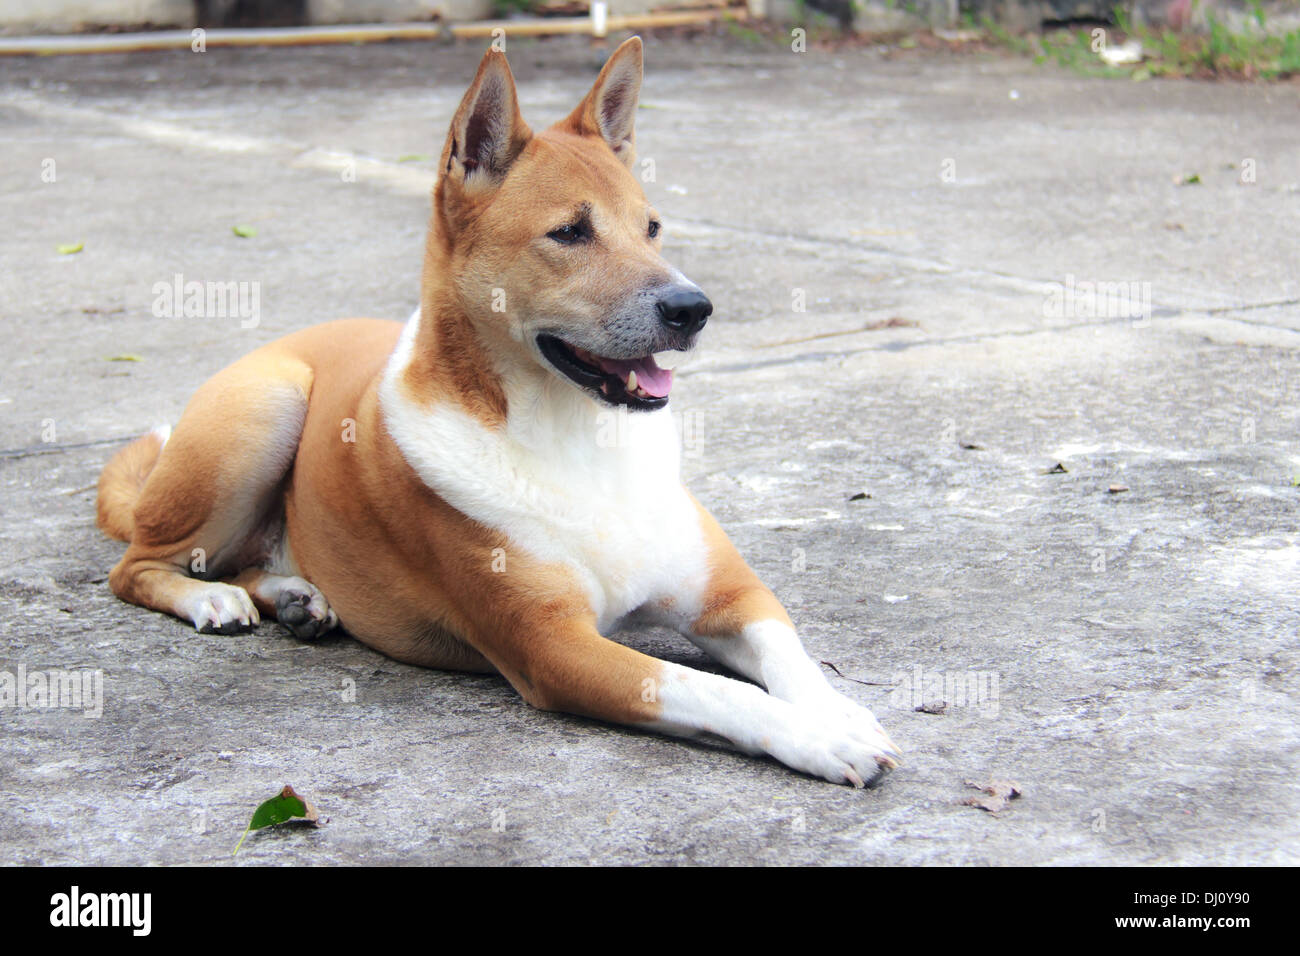 Brown dog looking , Thai dog relax Stock Photo